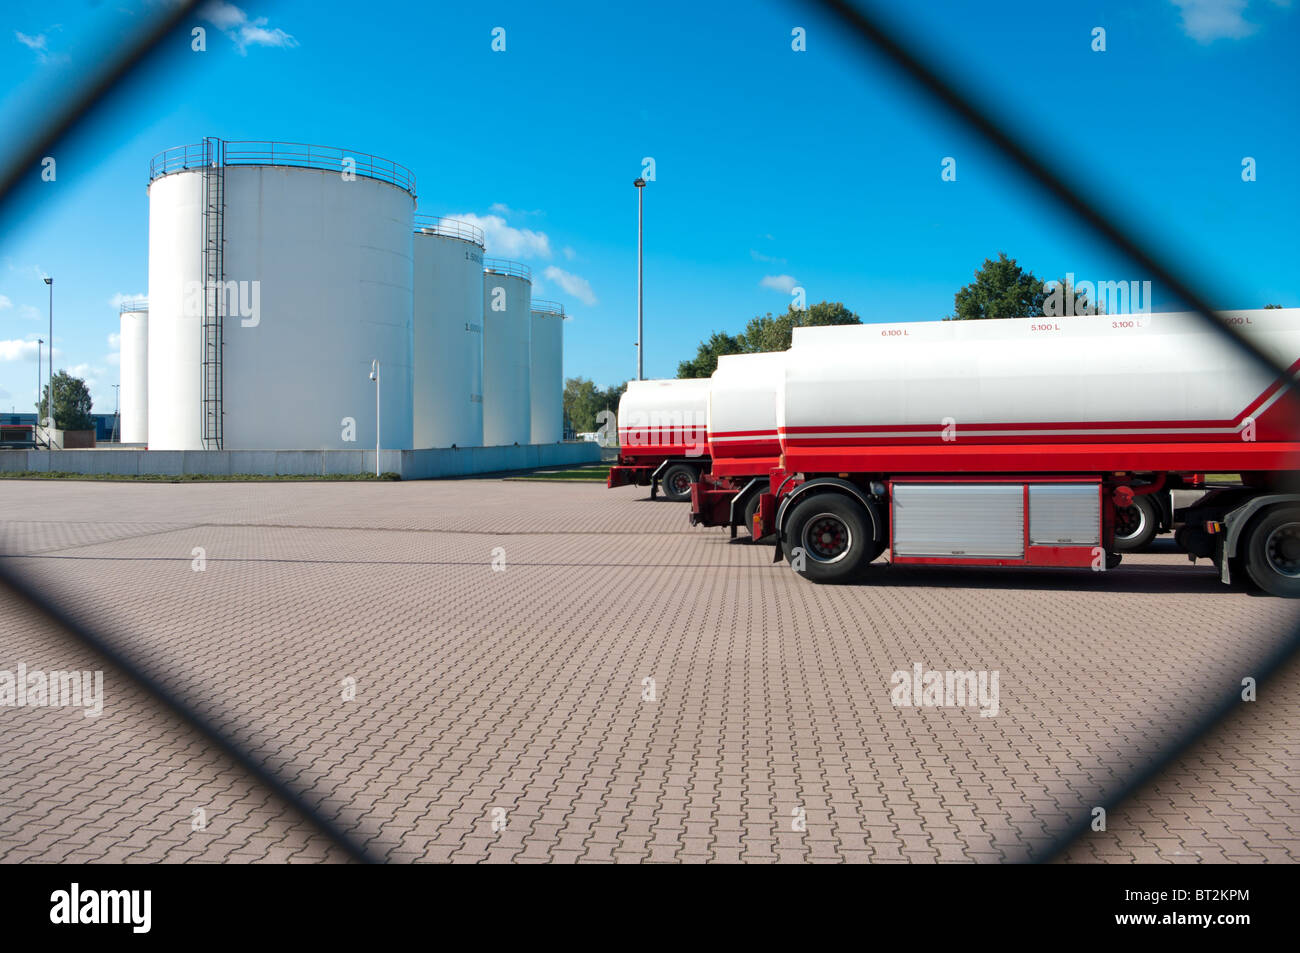 fuel tanks seen from behind a fence Stock Photo